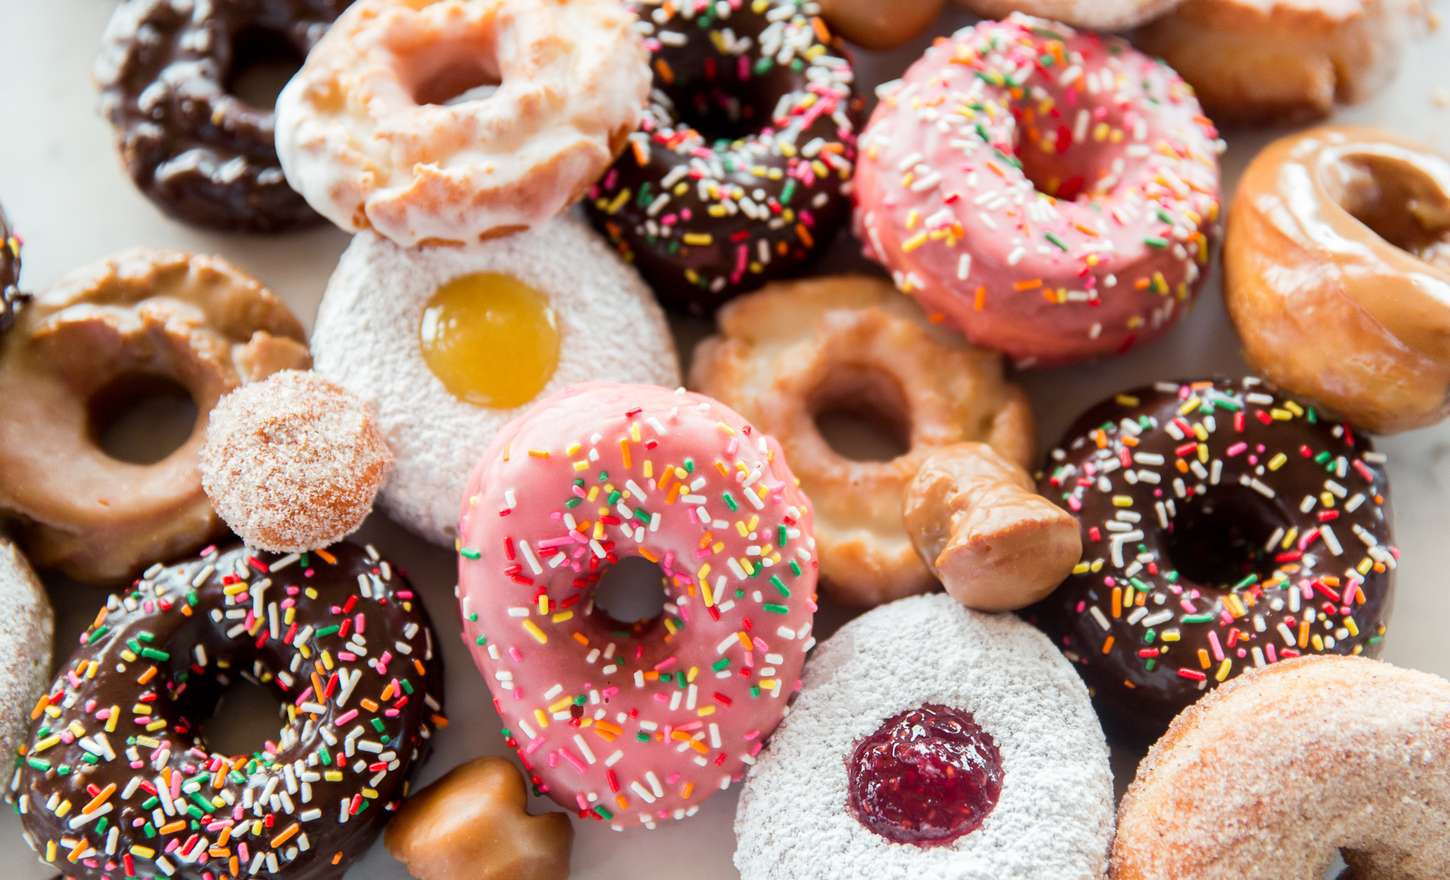 🥨 Pick Some Baked Goods and We’ll Reveal a Deep Truth About You donuts